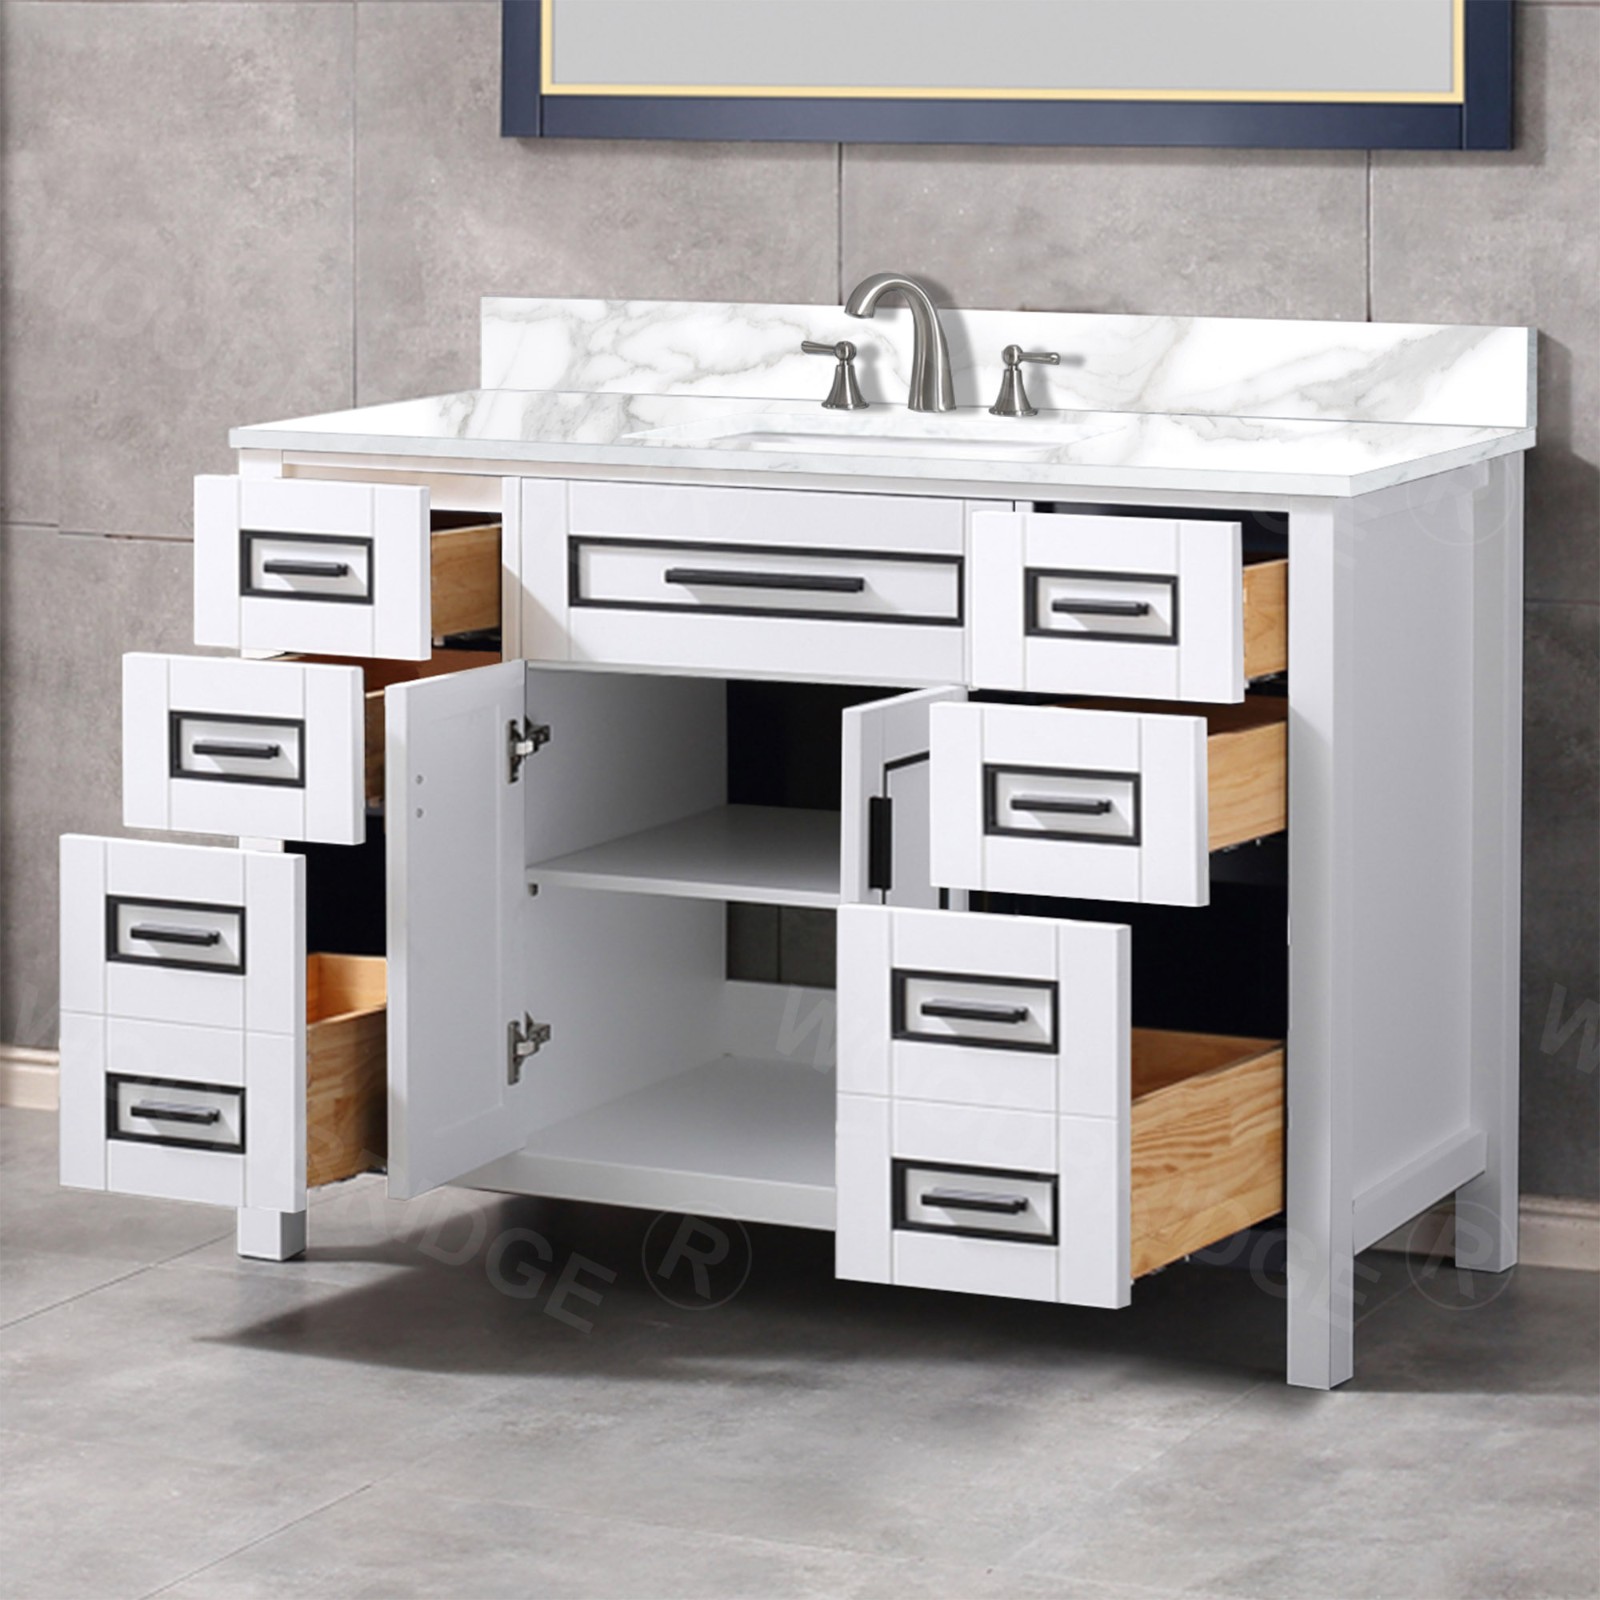  WOODBRIDGE Milan  49” Floor Mounted Single Basin Vanity Set with Solid Wood Cabinet in White and Engineered stone composite Vanity Top in Fish Belly White with Pre-installed Undermount Rectangle Bathroom Sink and Pre-Drilled 3-Hole for 4” Centerset Faucet_4680